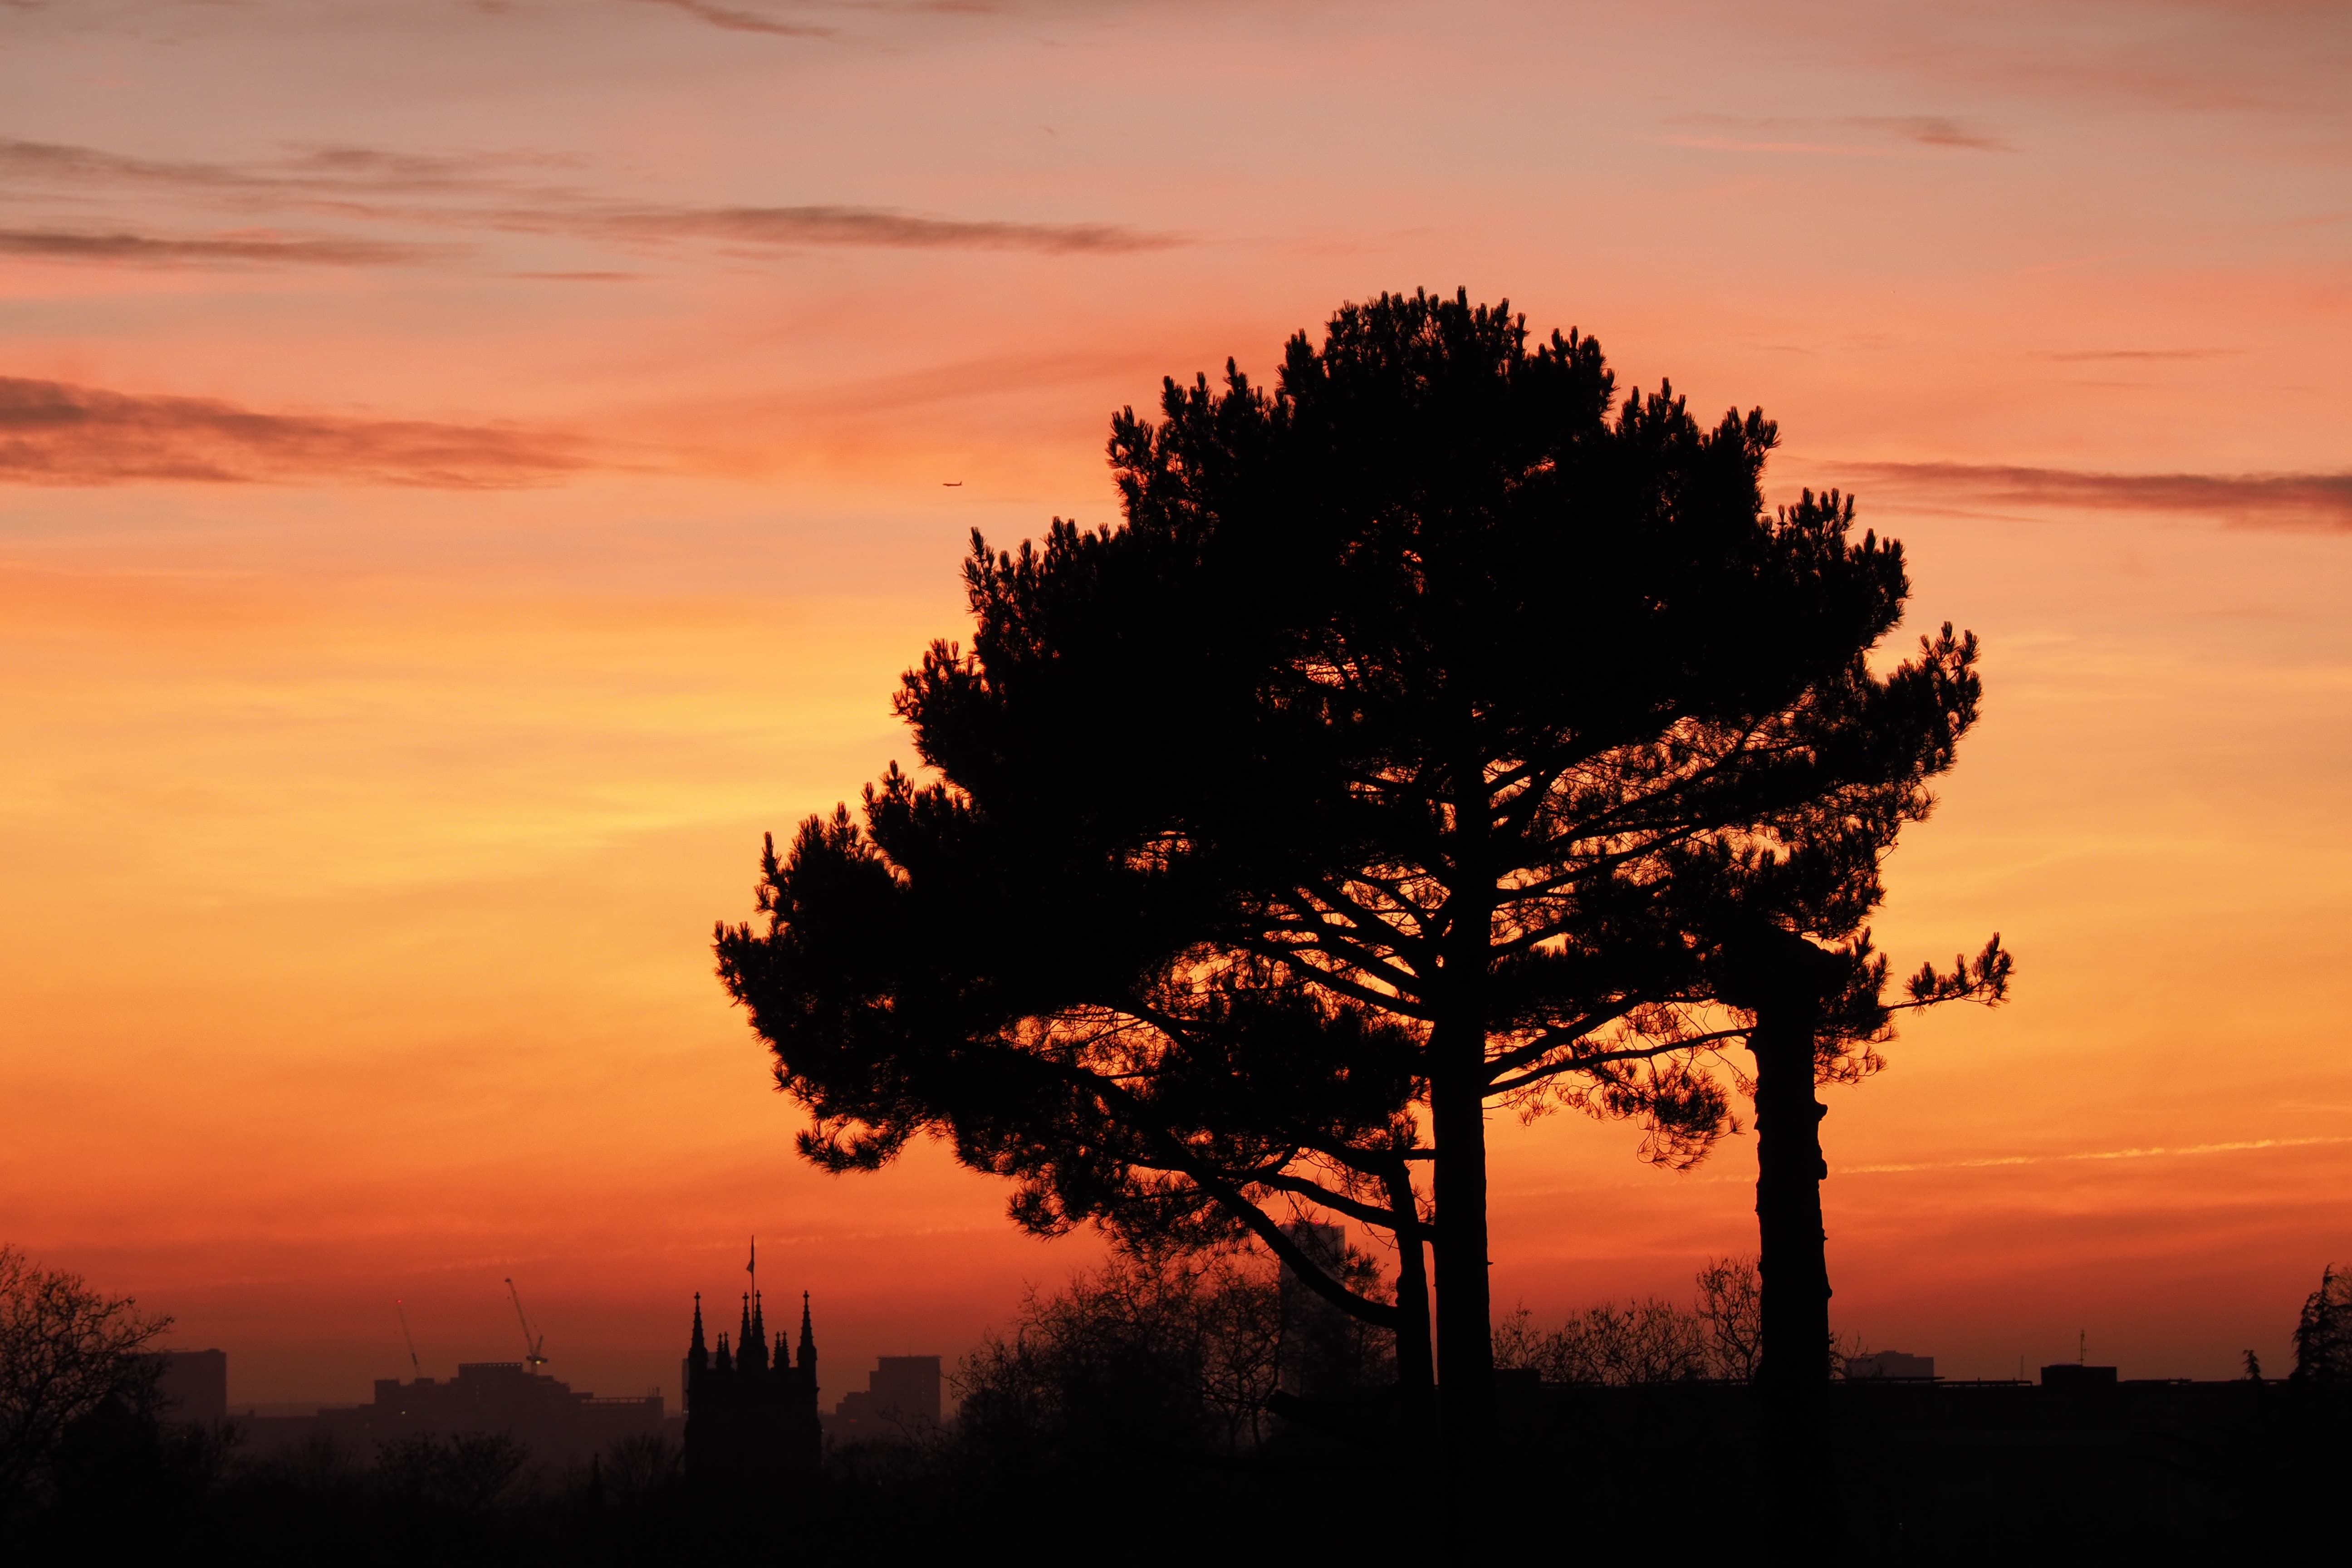 12-100mm f4 IS Pro sample photo, orange sunset with silhouette of a tree and city's skyline in the background, 1/50s, f/5.6, ISO200, 100mm, E-M1 II